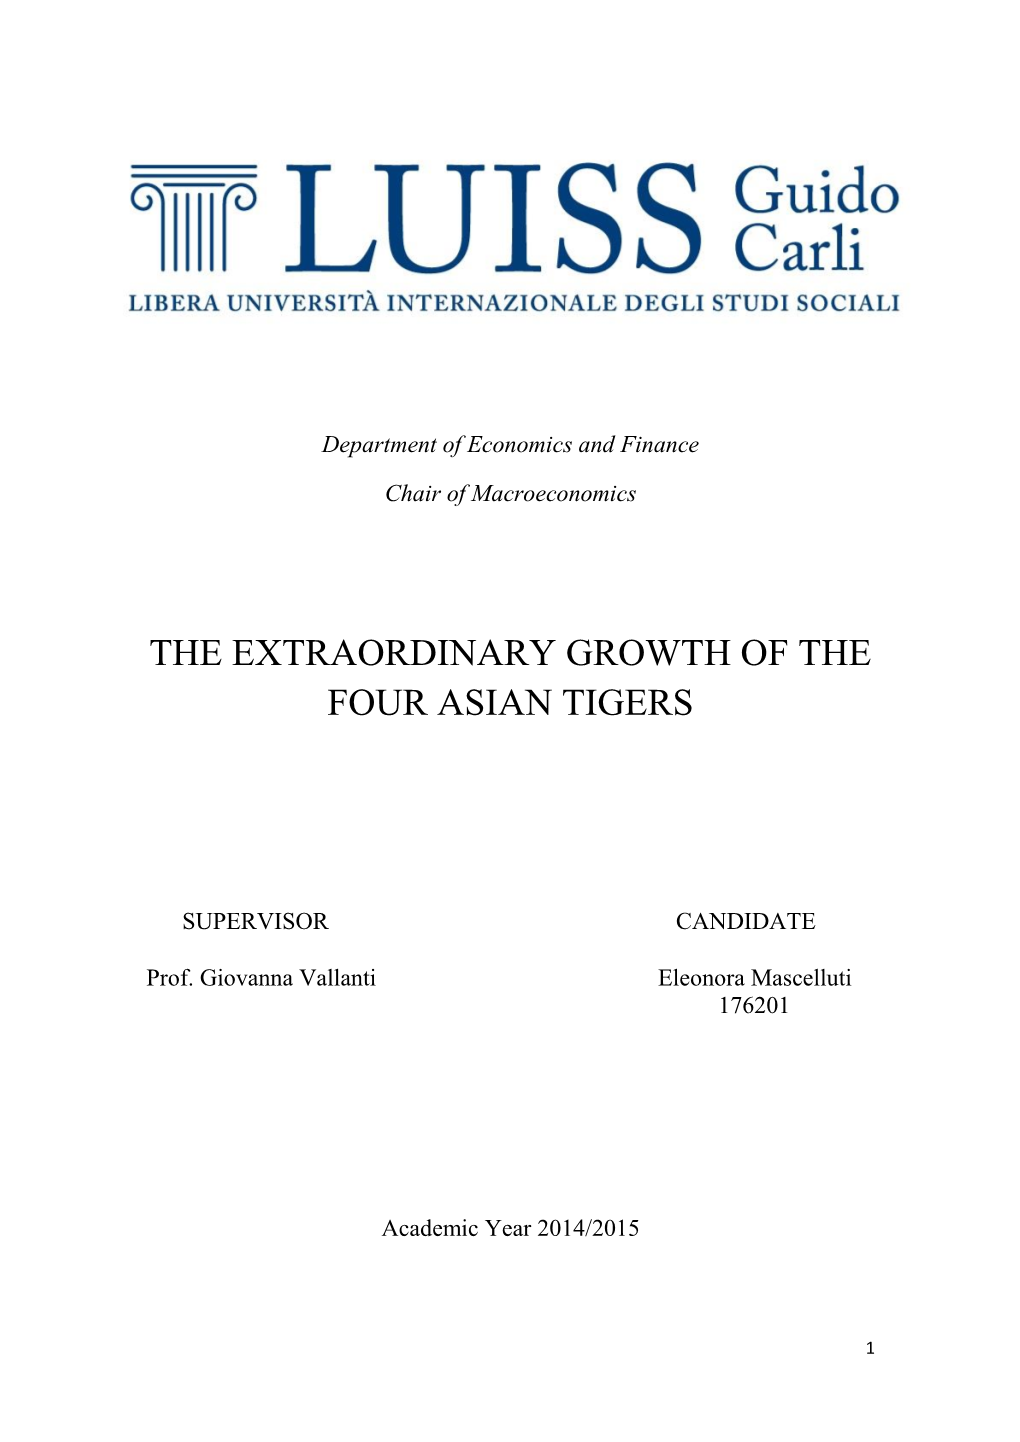 The Extraordinary Growth of the Four Asian Tigers